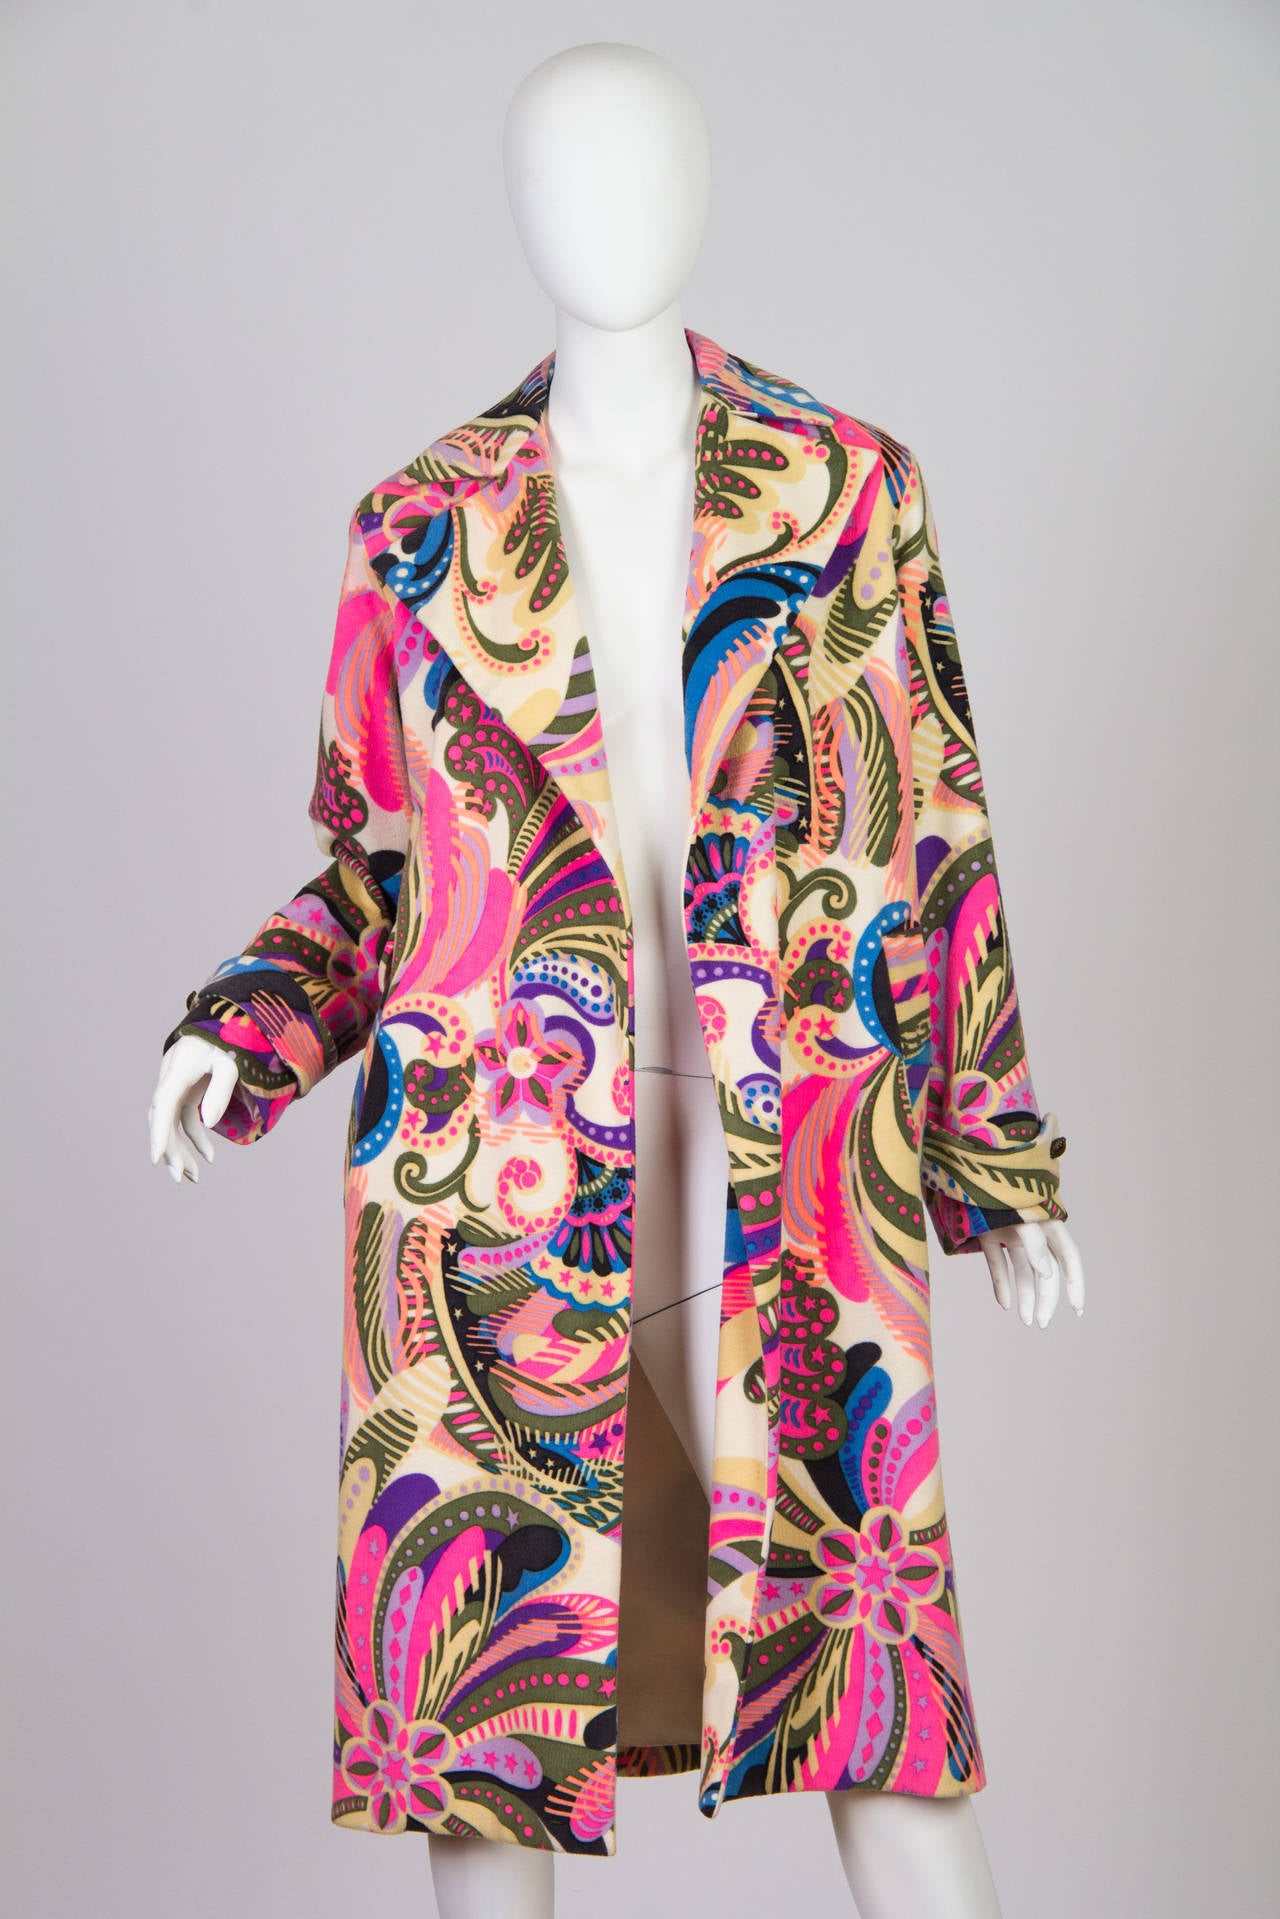 Psycadellic colours to brighten the coldest of winter days. From none other than Versace himself. Several designers from the house themselves were surprised to see such a youthful print from their past when they saw this coat. Most people are